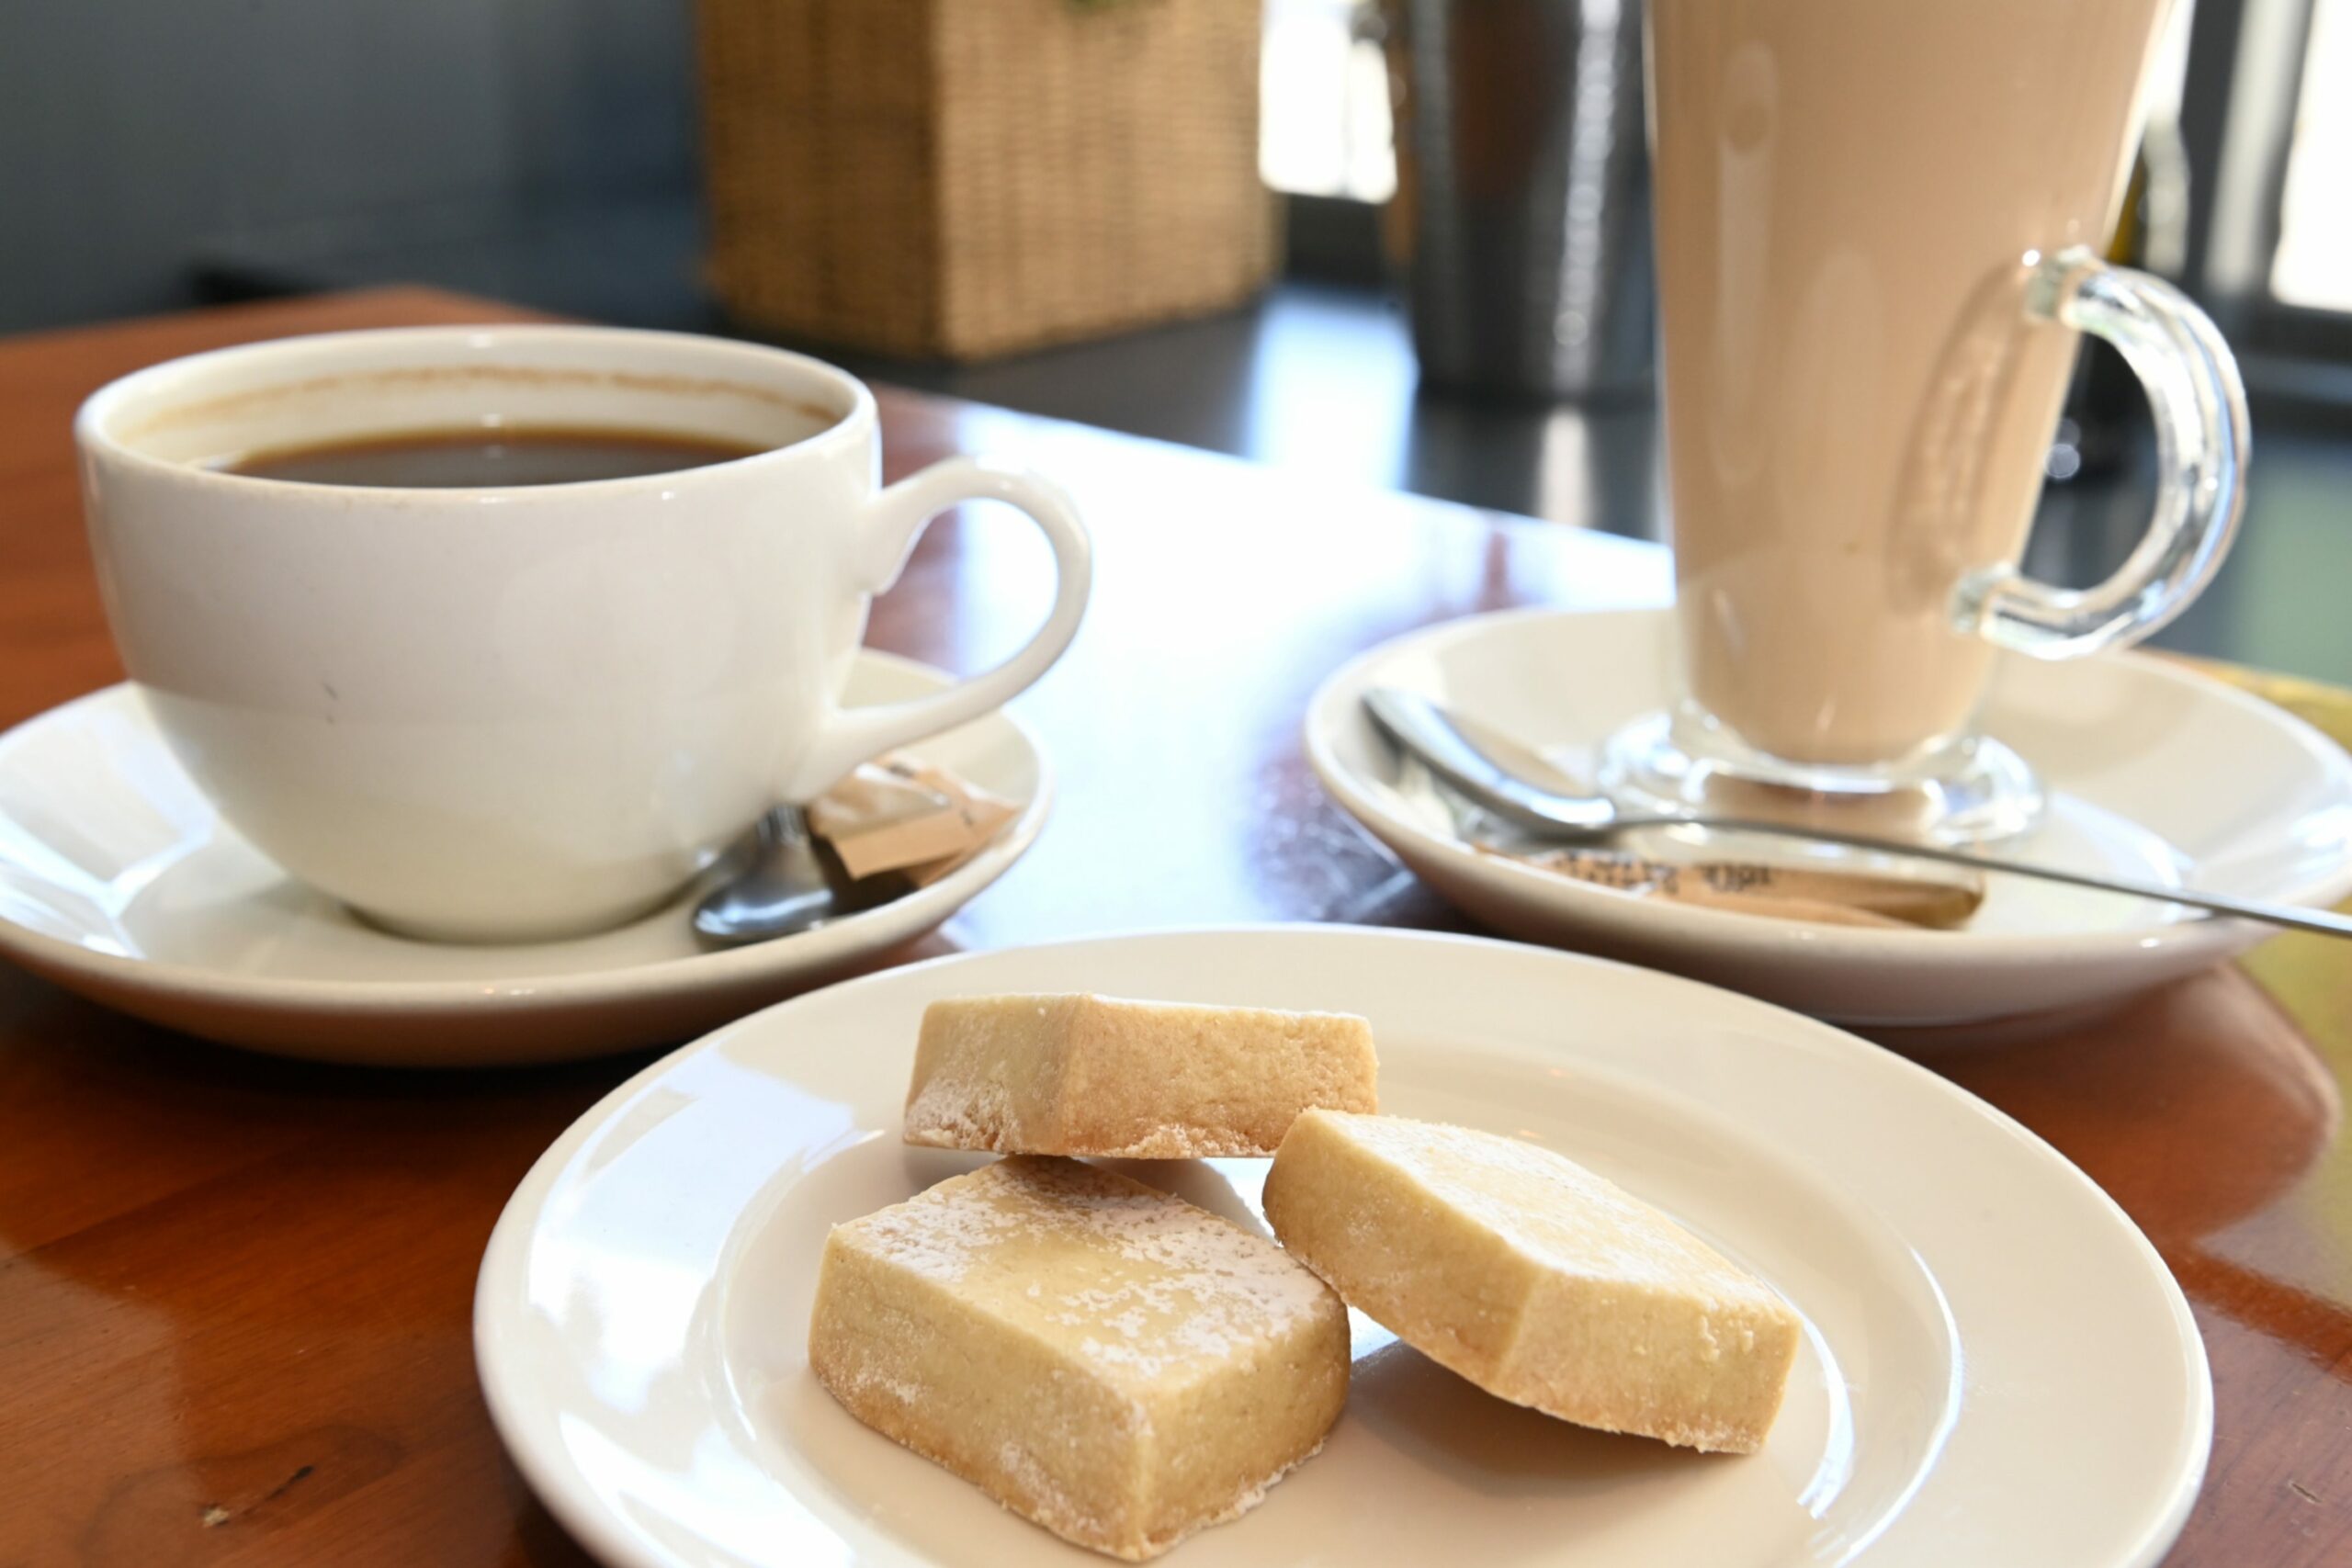 Coffee and shortbread at City bar and diner